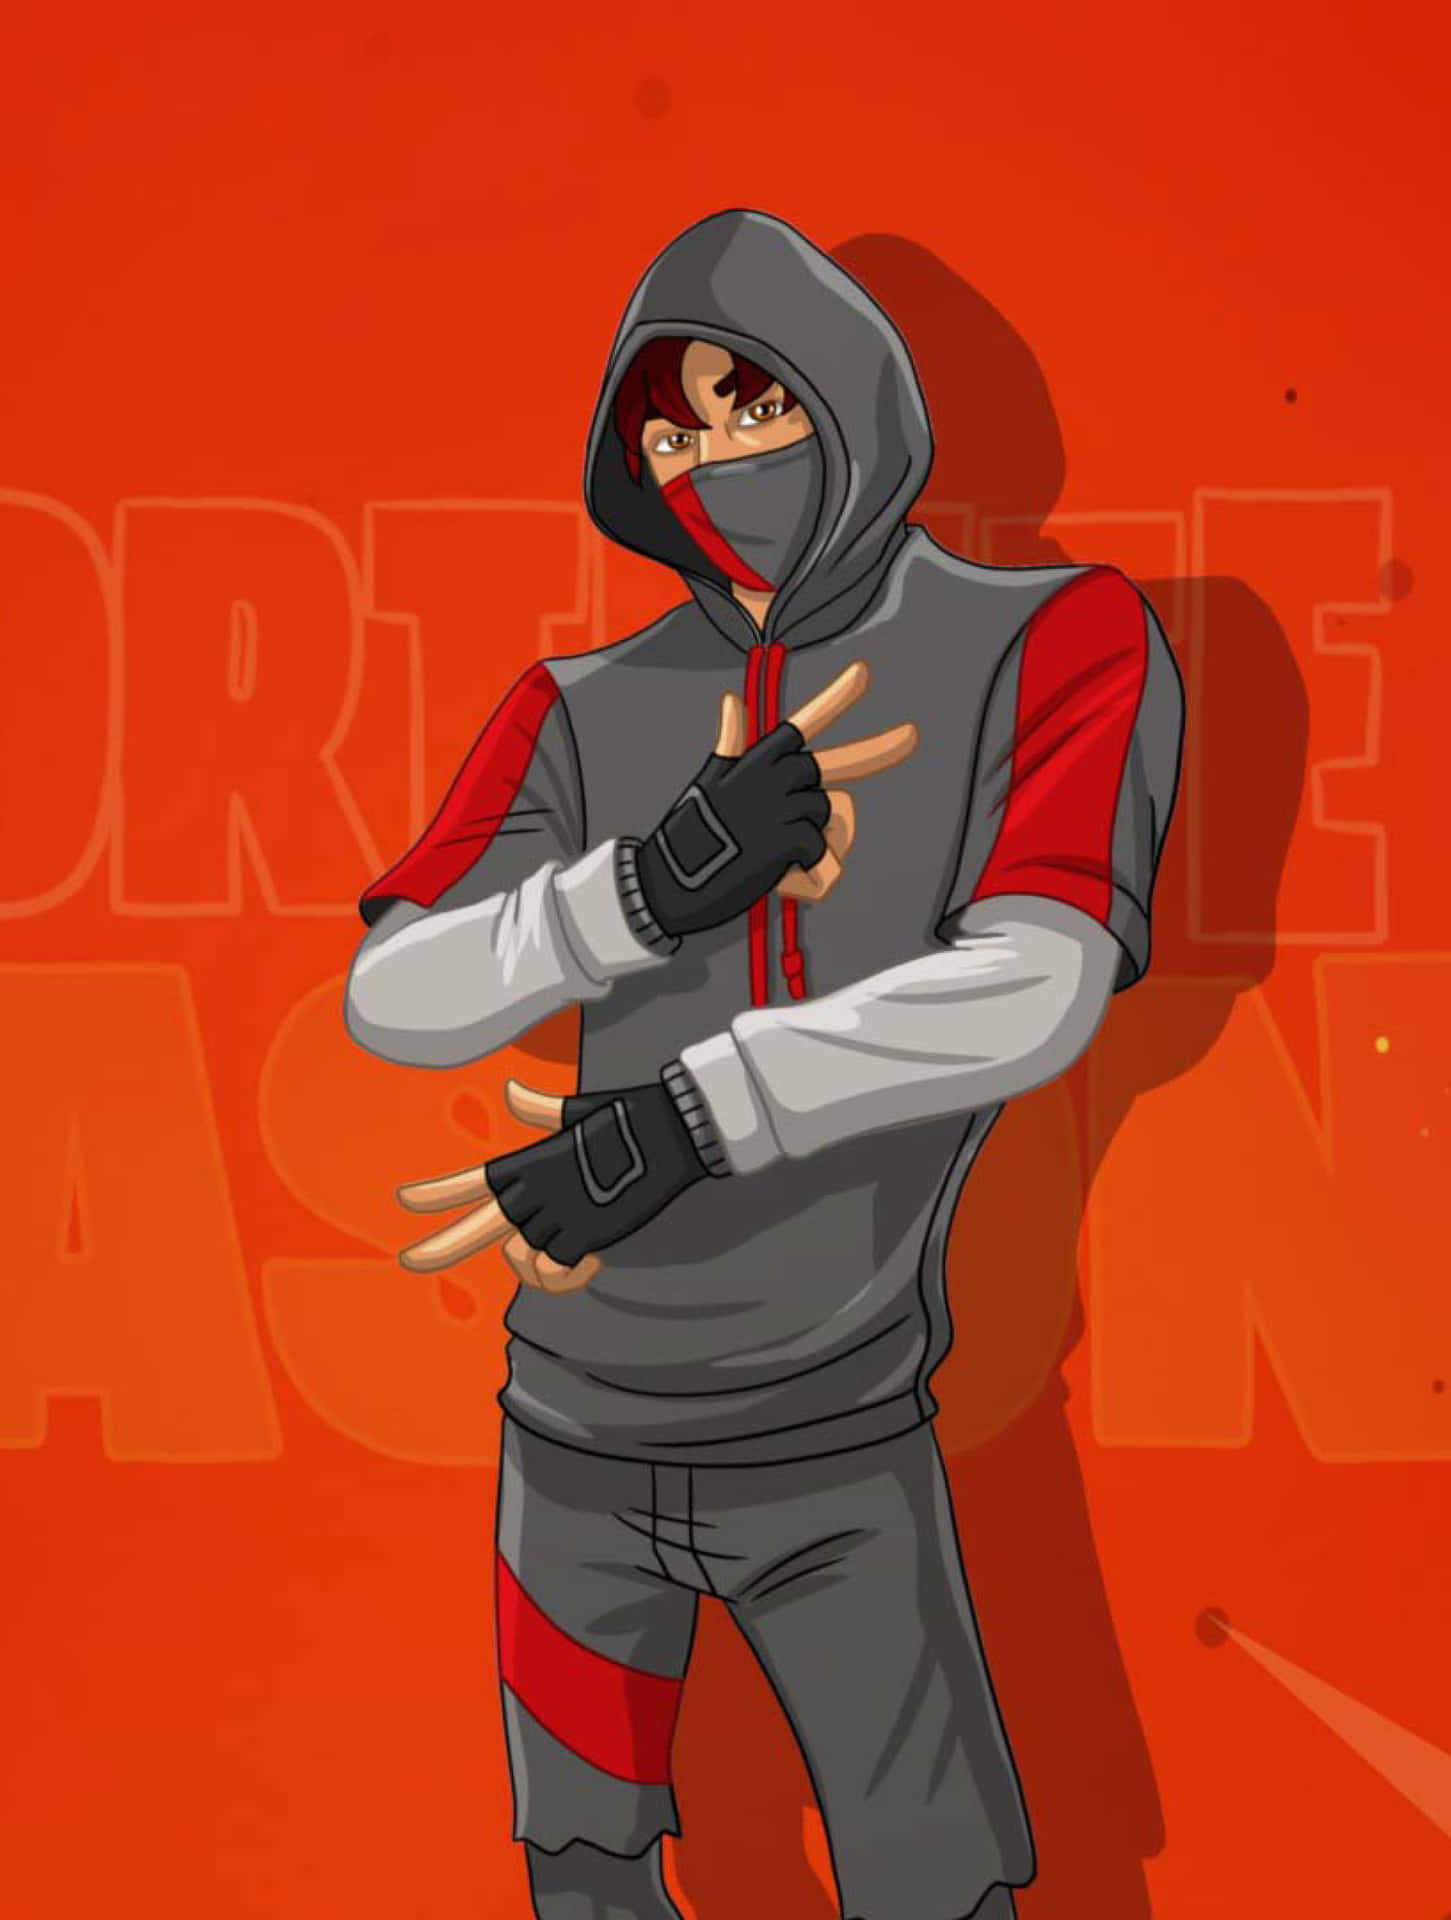 Get ready to dominate the battlefield with the all new Fortnite Ikonik Skin! Wallpaper